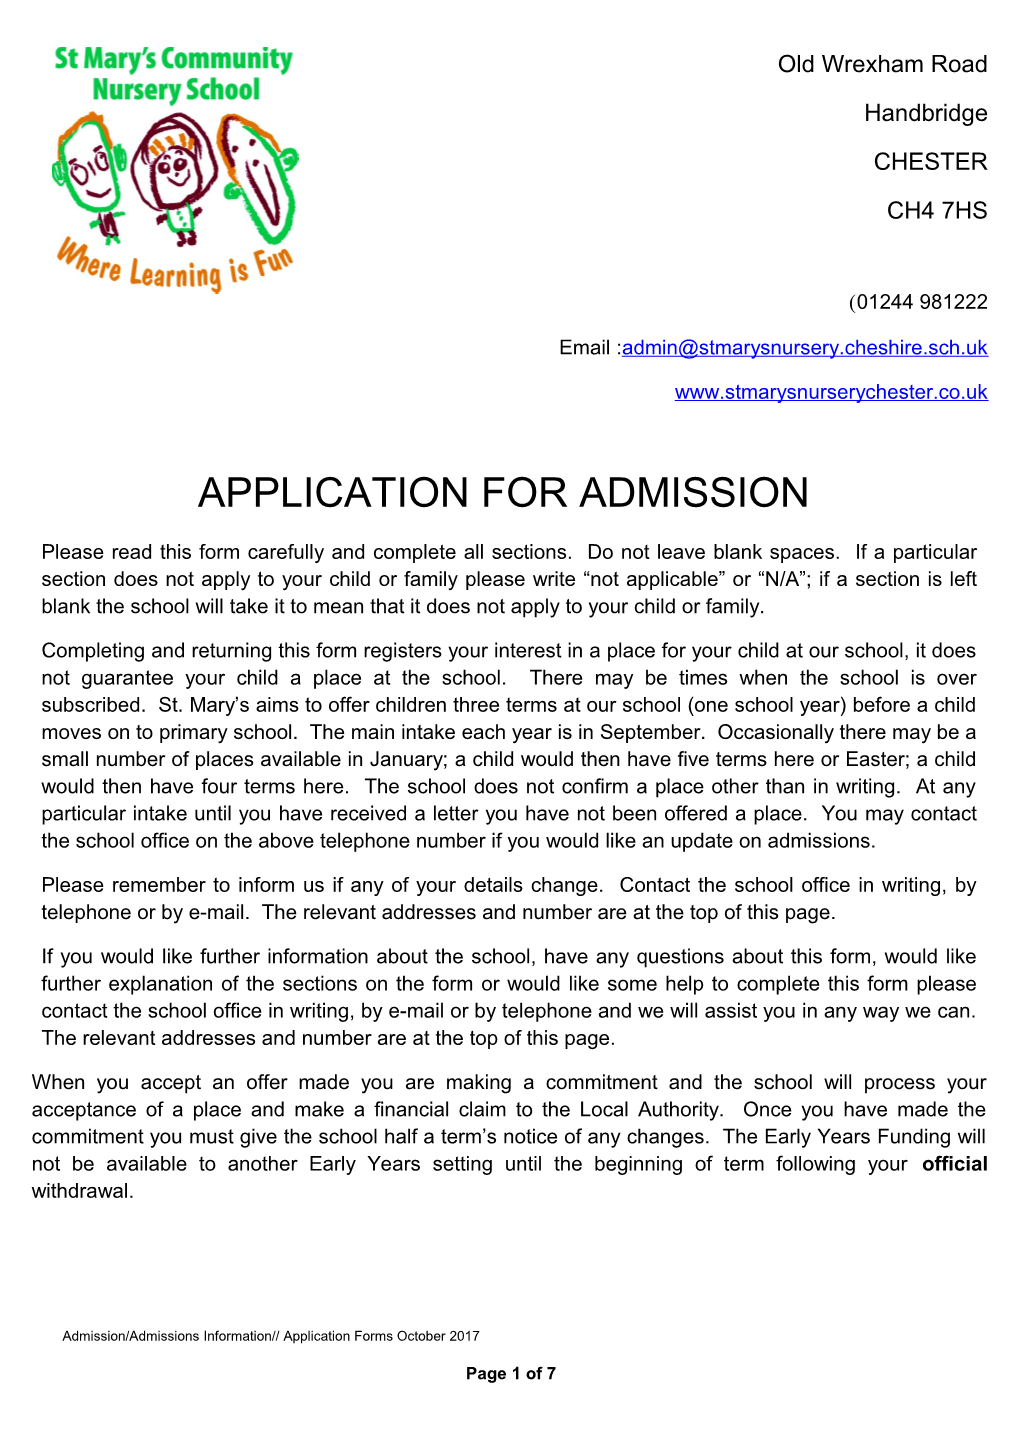 Application for Admission s7